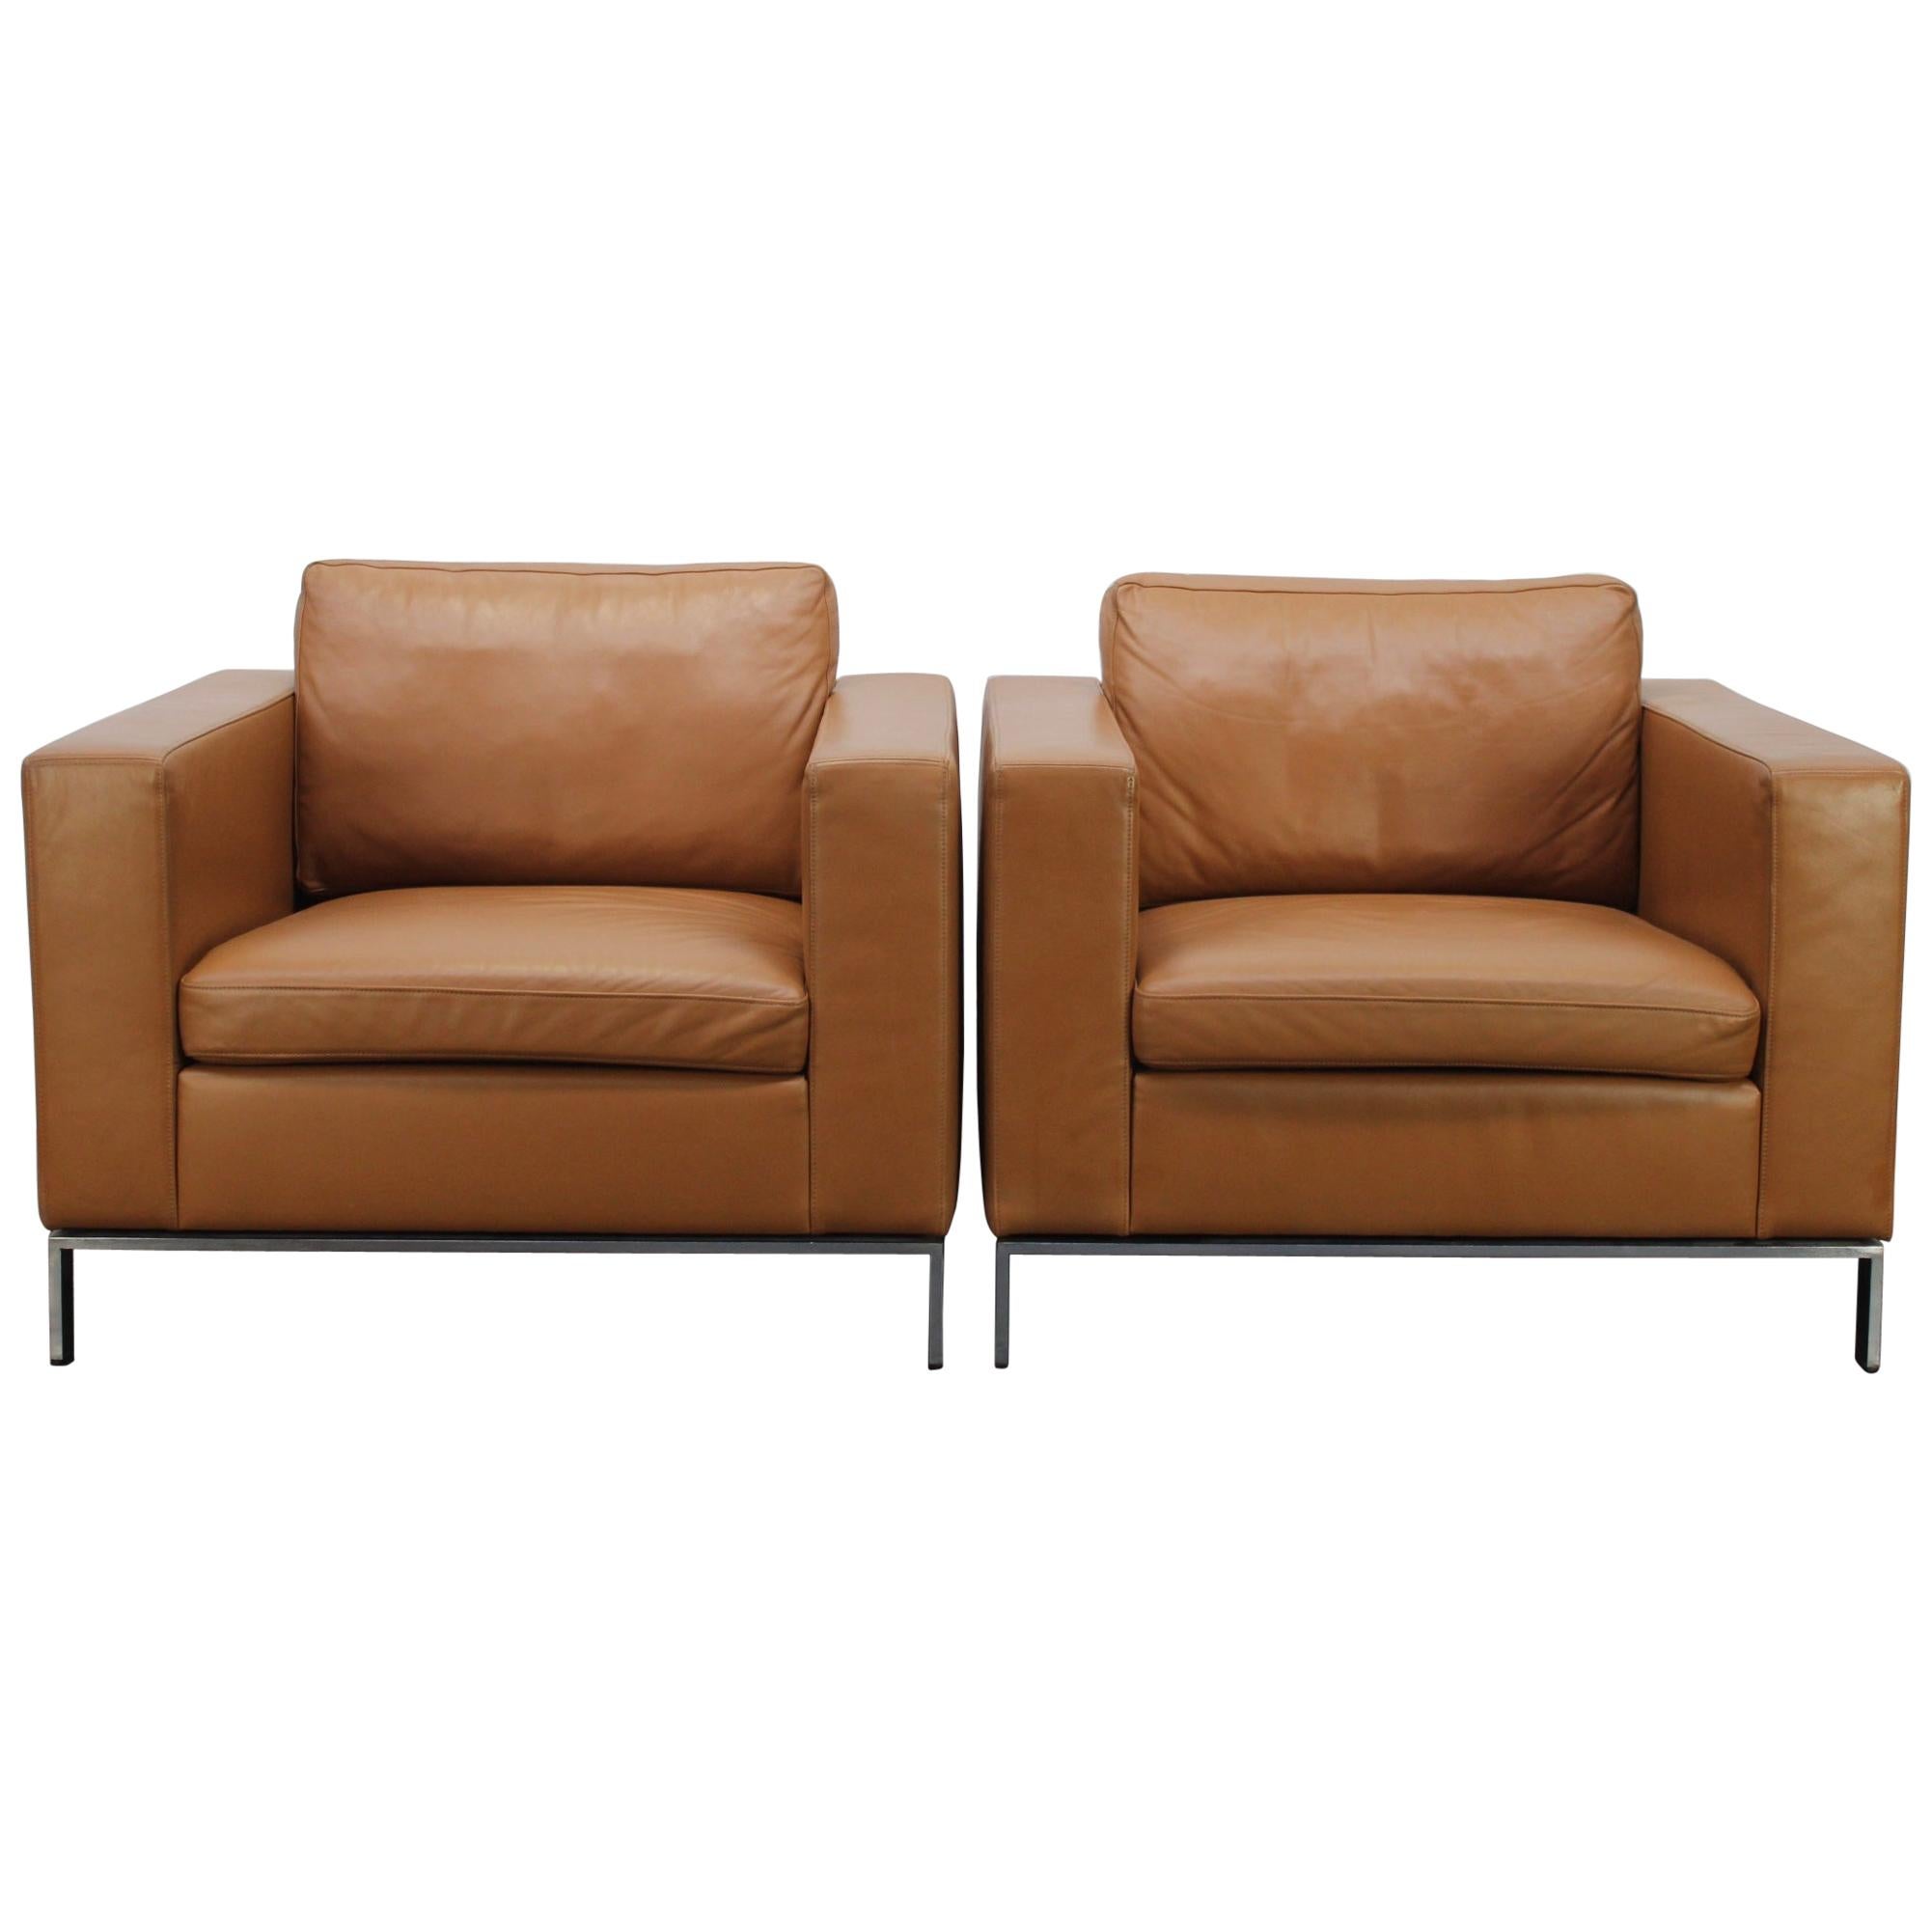 2 Walter Knoll "Foster 503.10" Armchairs in Tan-Brown Leather by Norman Foster